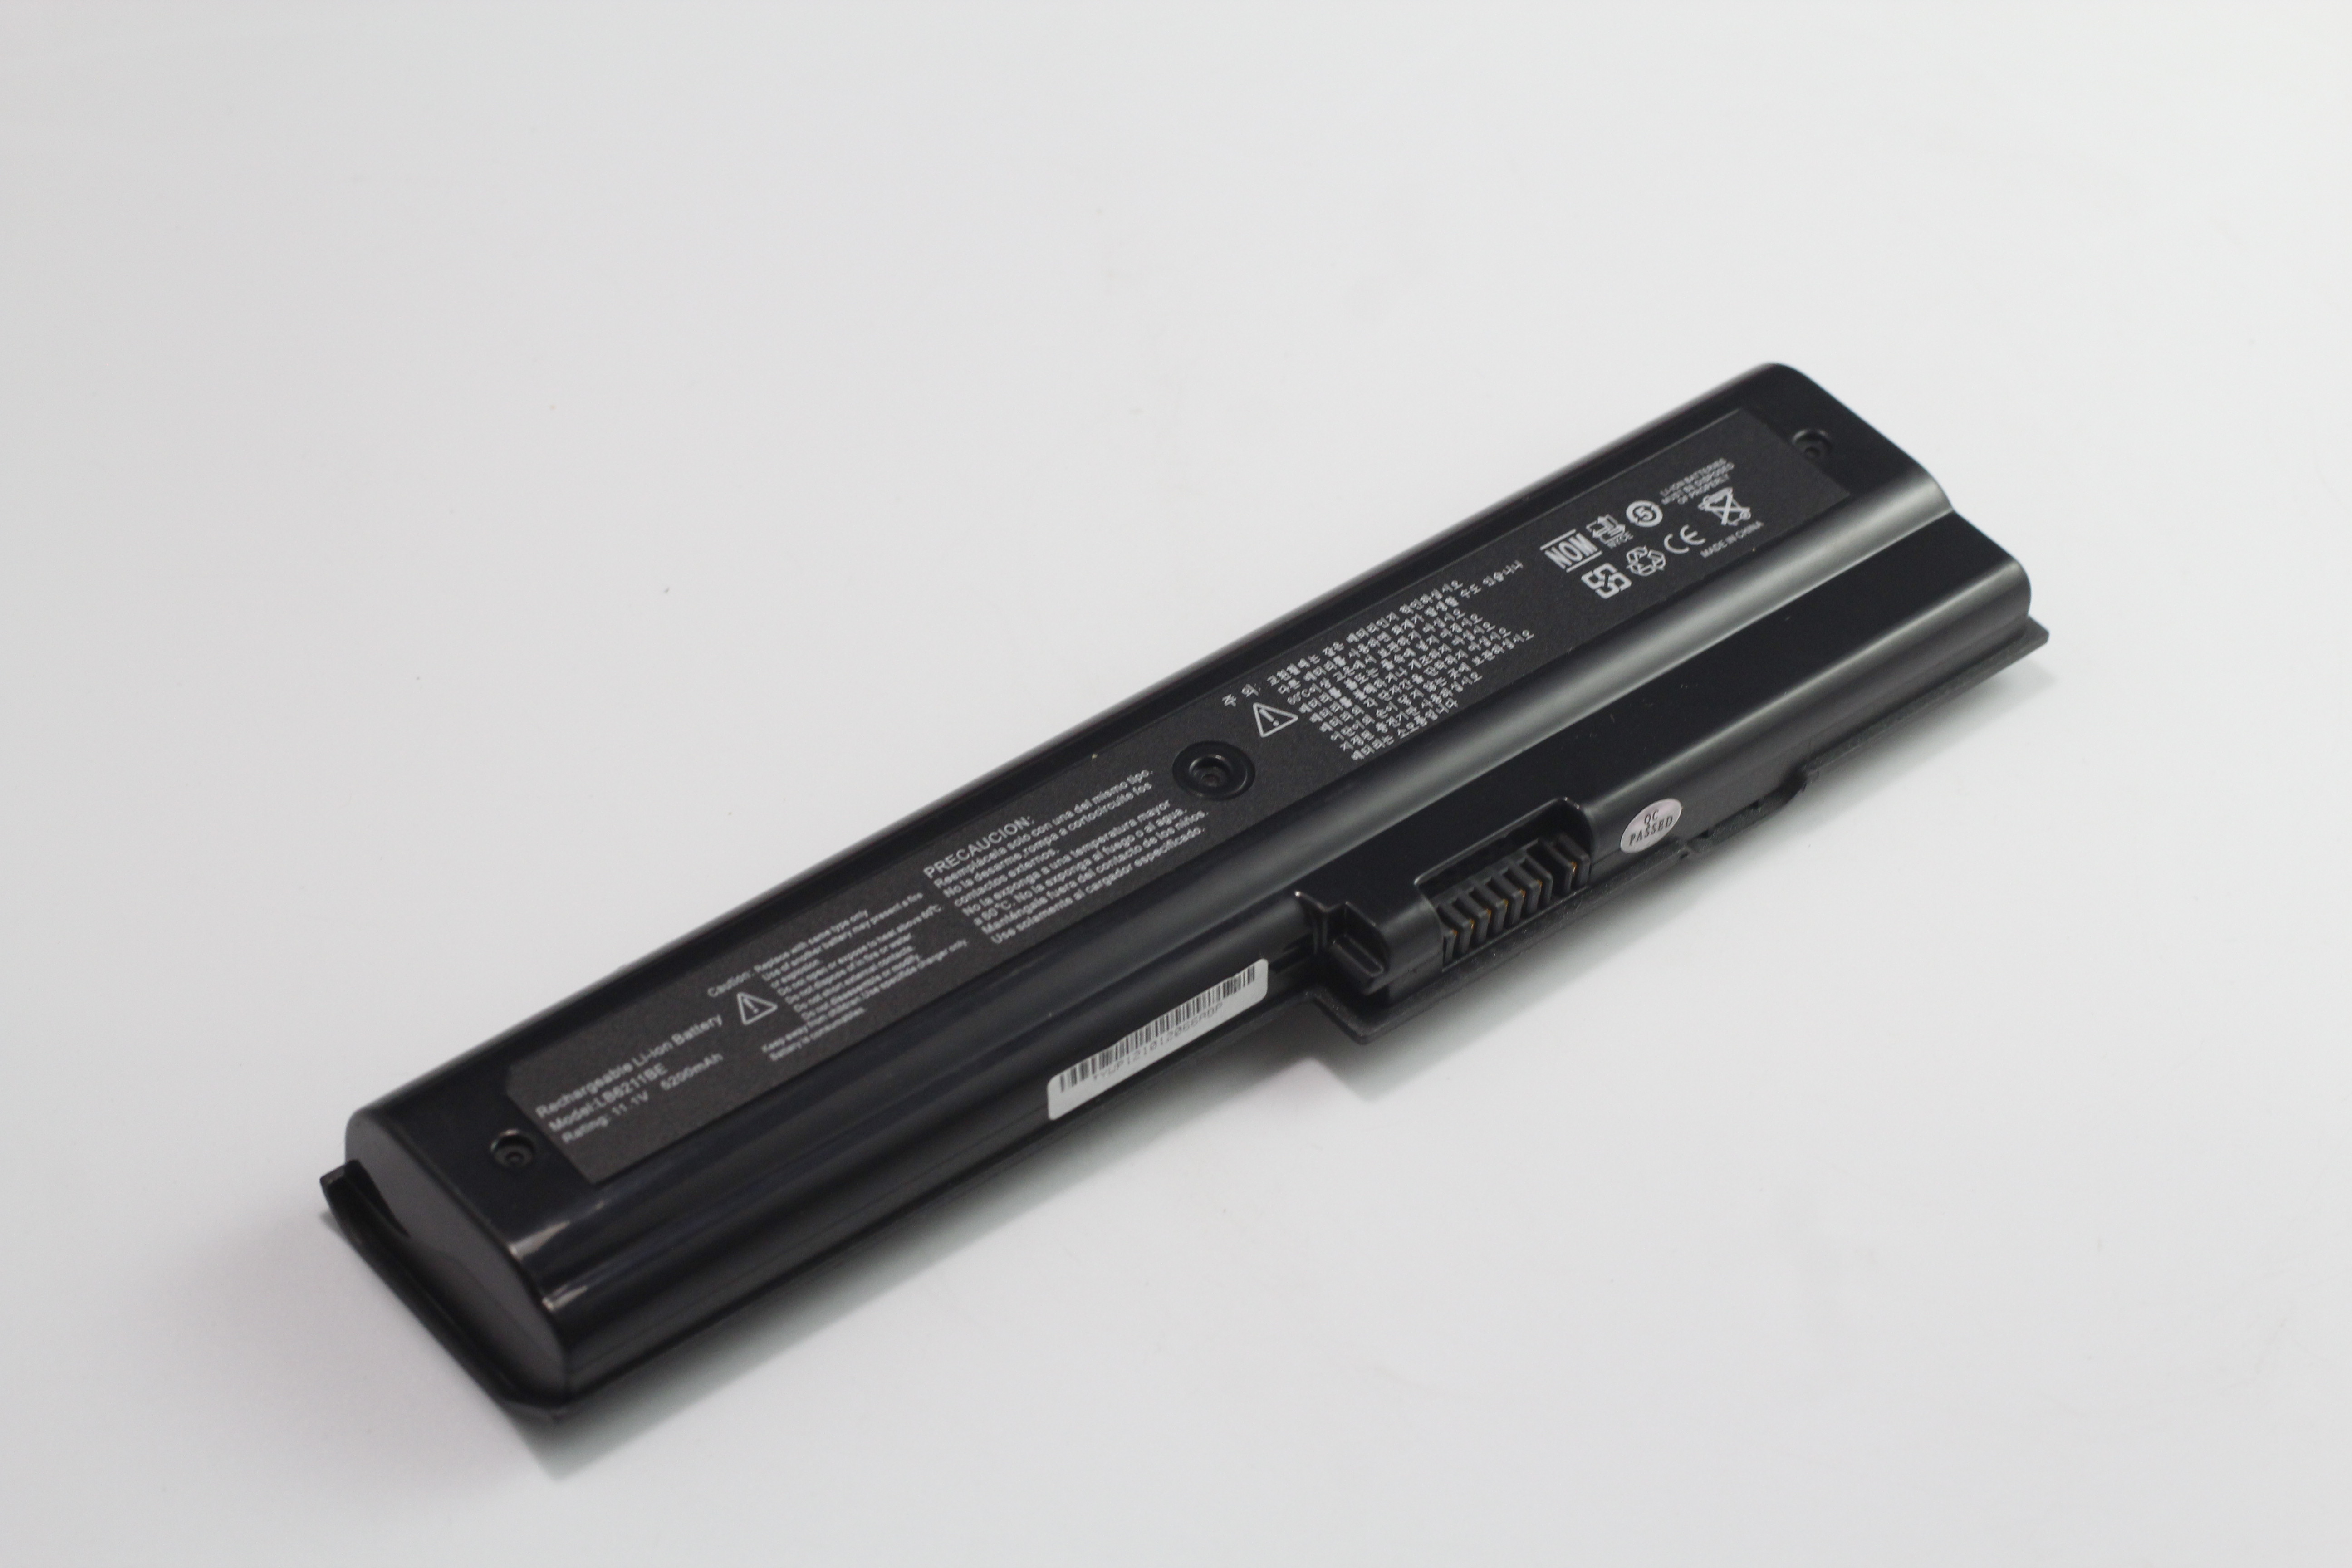 LB6211BE Battery,LG LB6211BE P300 P310 Series Laptop Battery Replacement in EU